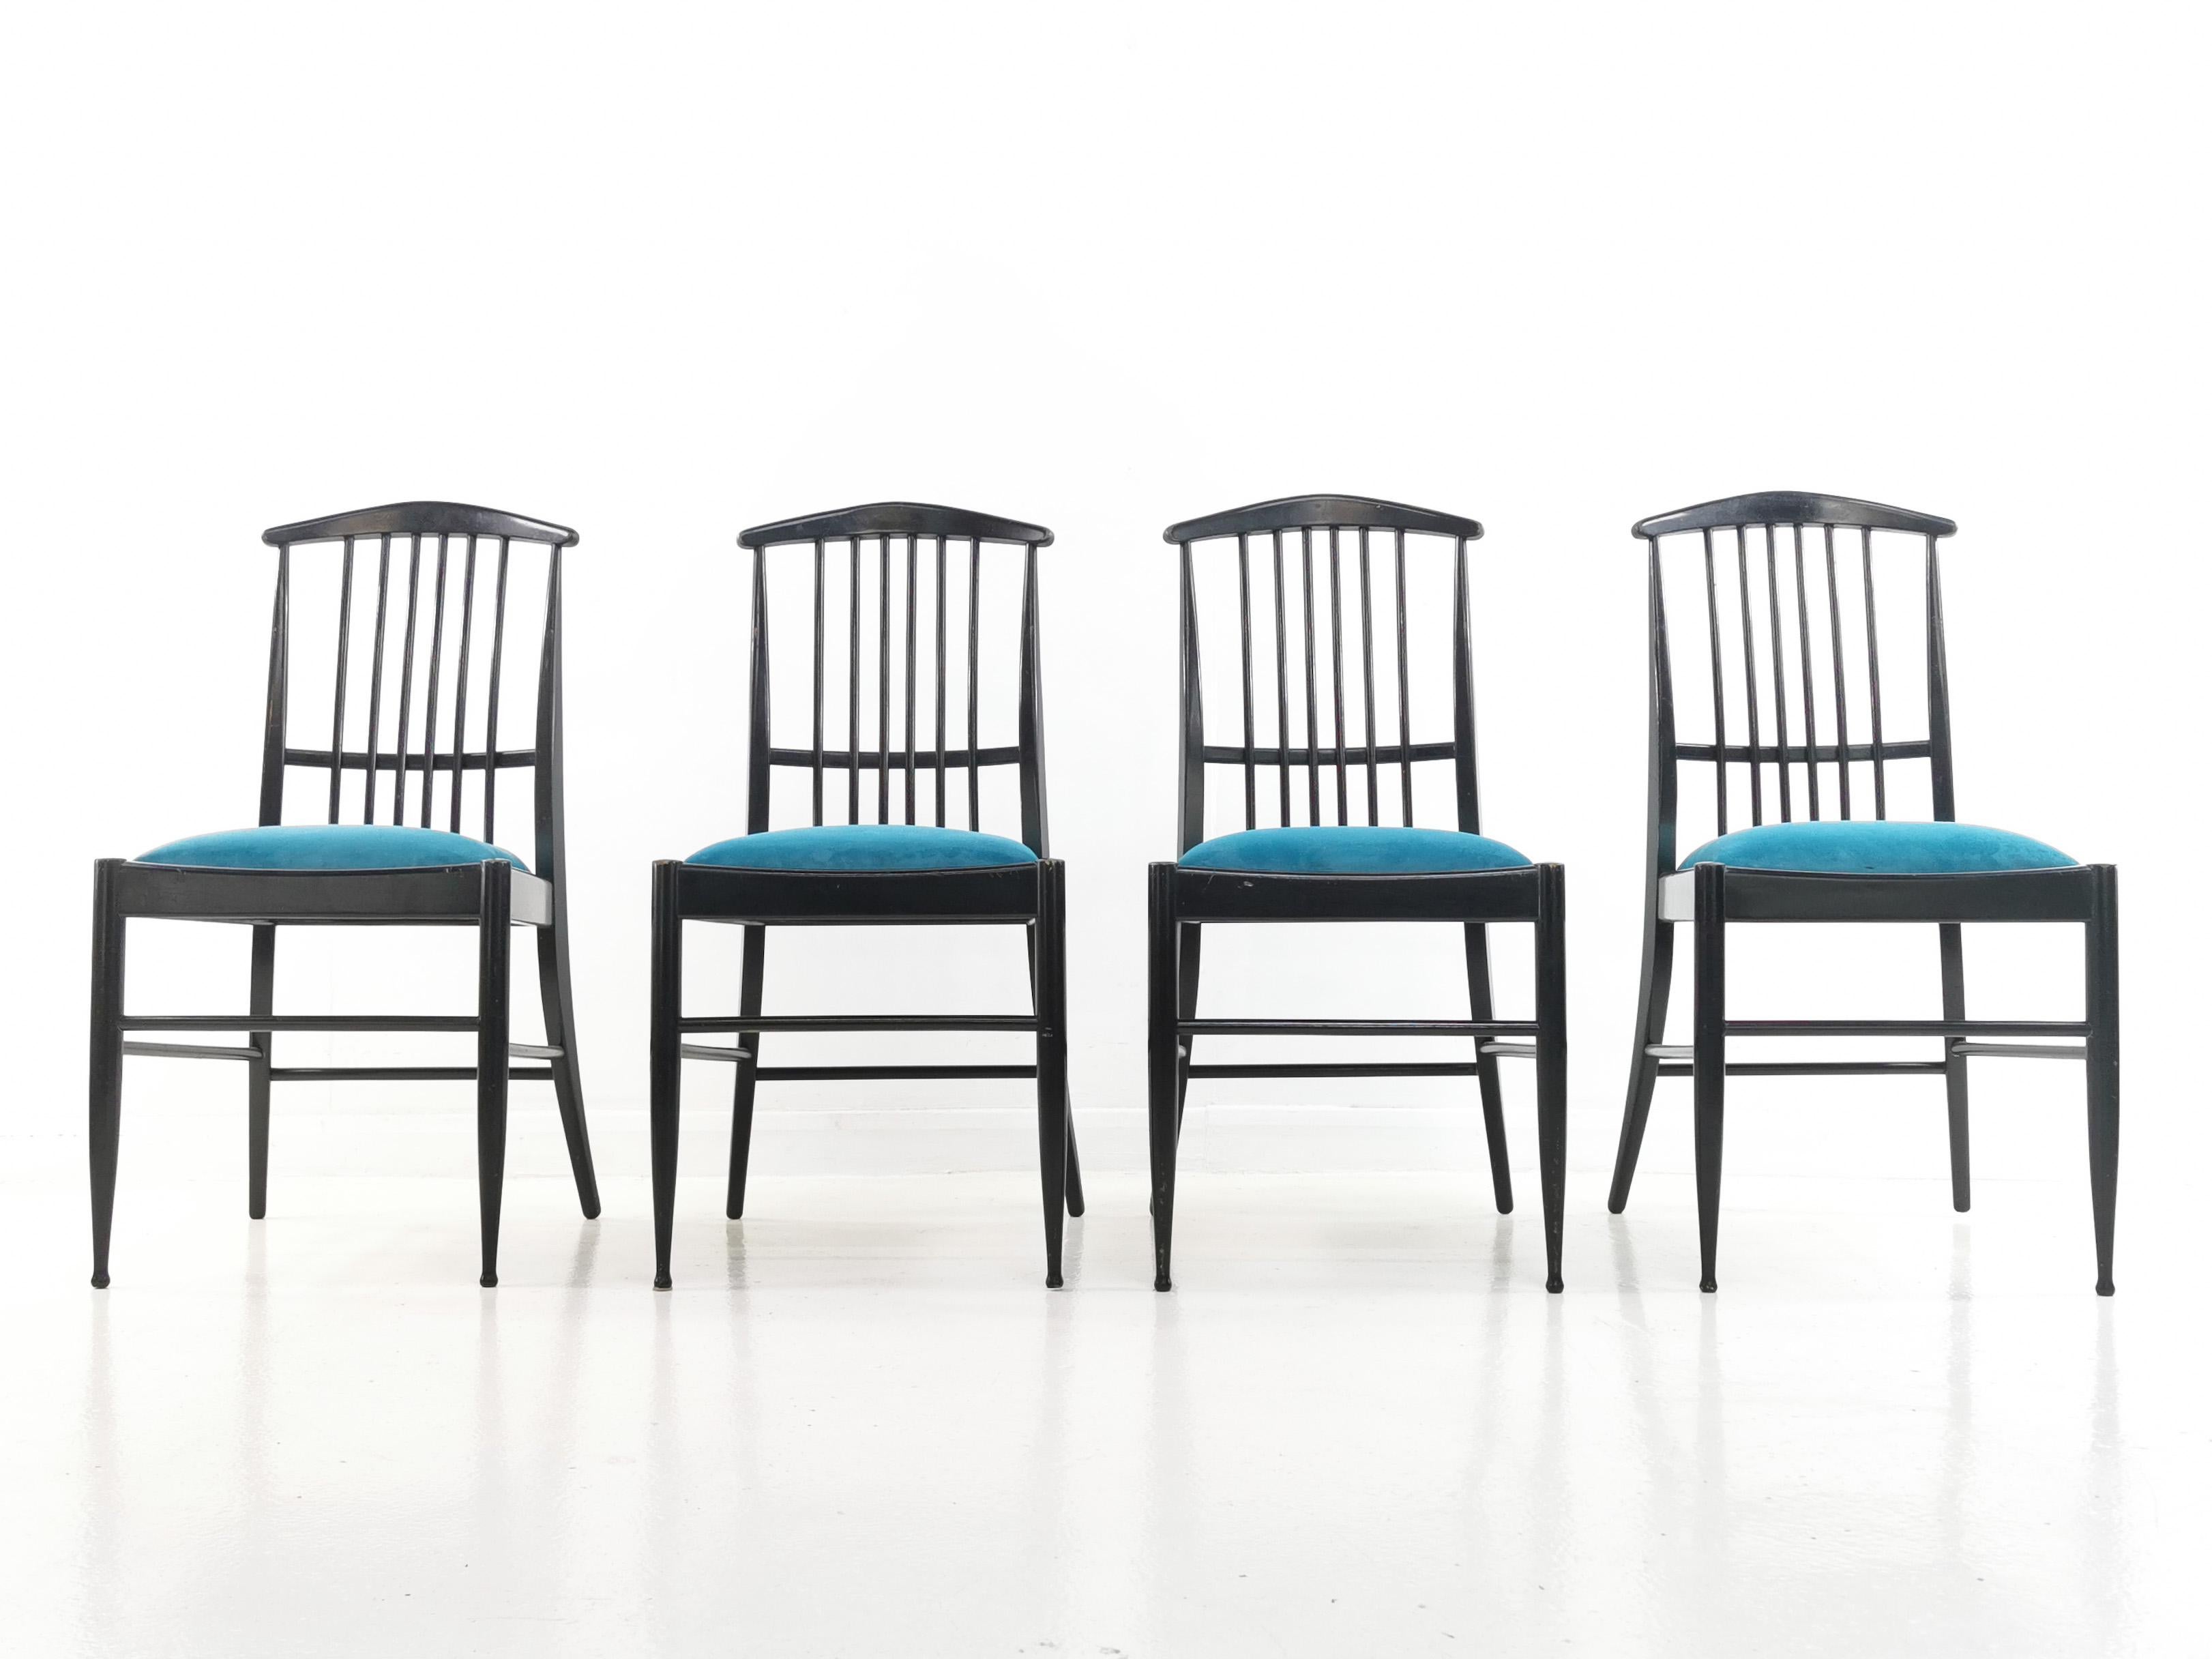 Scandinavian dining set

Designed for Asko by Kerstin Horlin-Holmquist, a renowned Swedish designer, this exquisite dining set is a stunning example of 1960s Scandinavian style. This ebonized set has been reupholstered in rich turquoise blue and